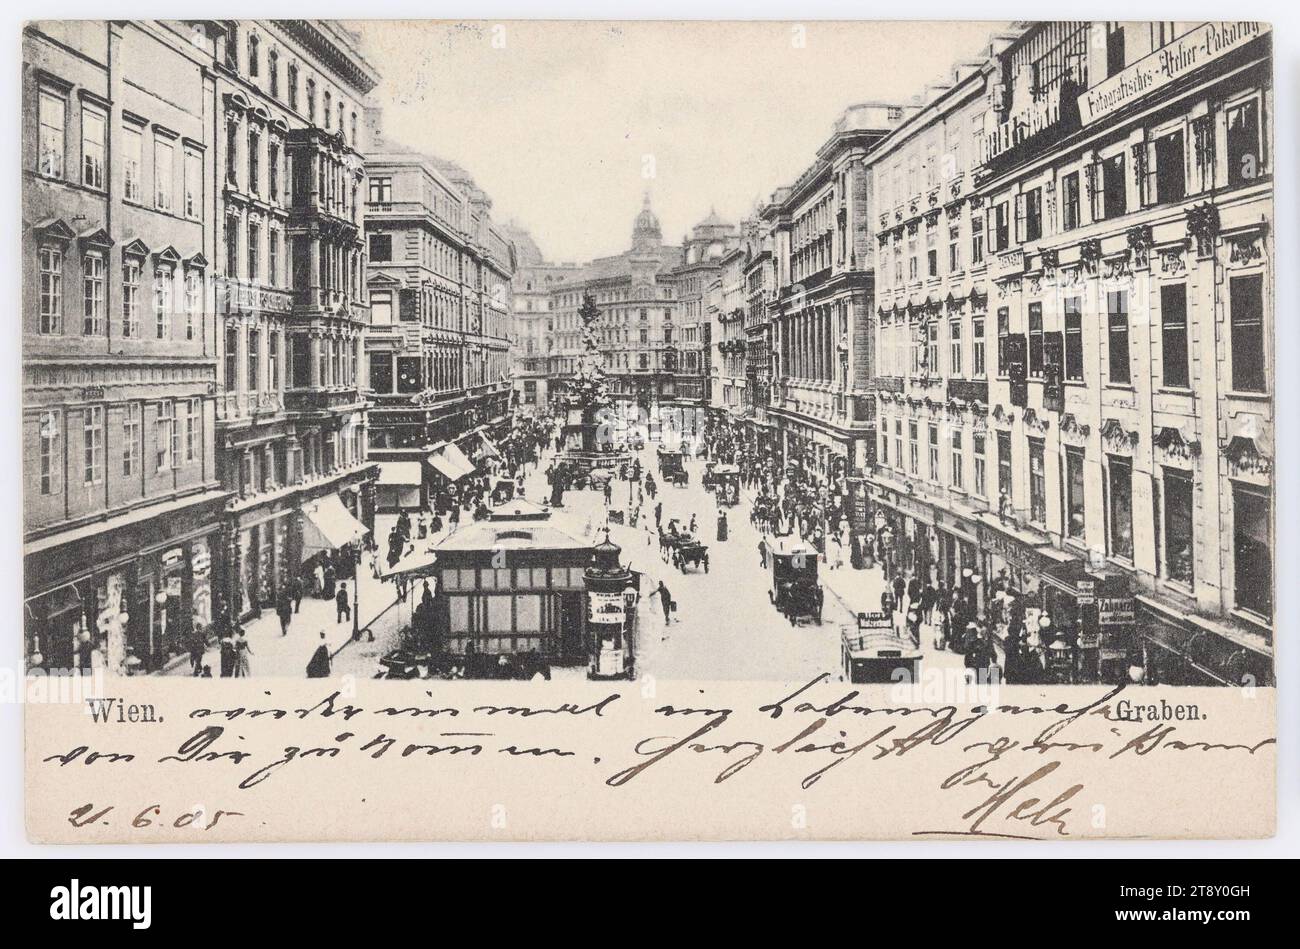 Vienna. Graben, Brüder Kohn KG (B. K. W. I.), Producer, 1905, paperboard, Collotype, Inscription, FROM, Vienna, TO, Krumbach, ADDRESS, Frau, Krumbach bei Edlitz, Aspangbahn, MESSAGE, Congratulations to you, your husband and the new phil Doctor! We have to wait a long time for such dignities. On 1.7. I am going to Gutenstein. Perhaps you will send me a sign of life from you there, Sincerely yours [name], 21.6.05, Media and Communication, Postcards with transliteration, 1st District: Innere Stadt, the usual house or row of houses, flat-building, apartment house, house combined with store Stock Photo